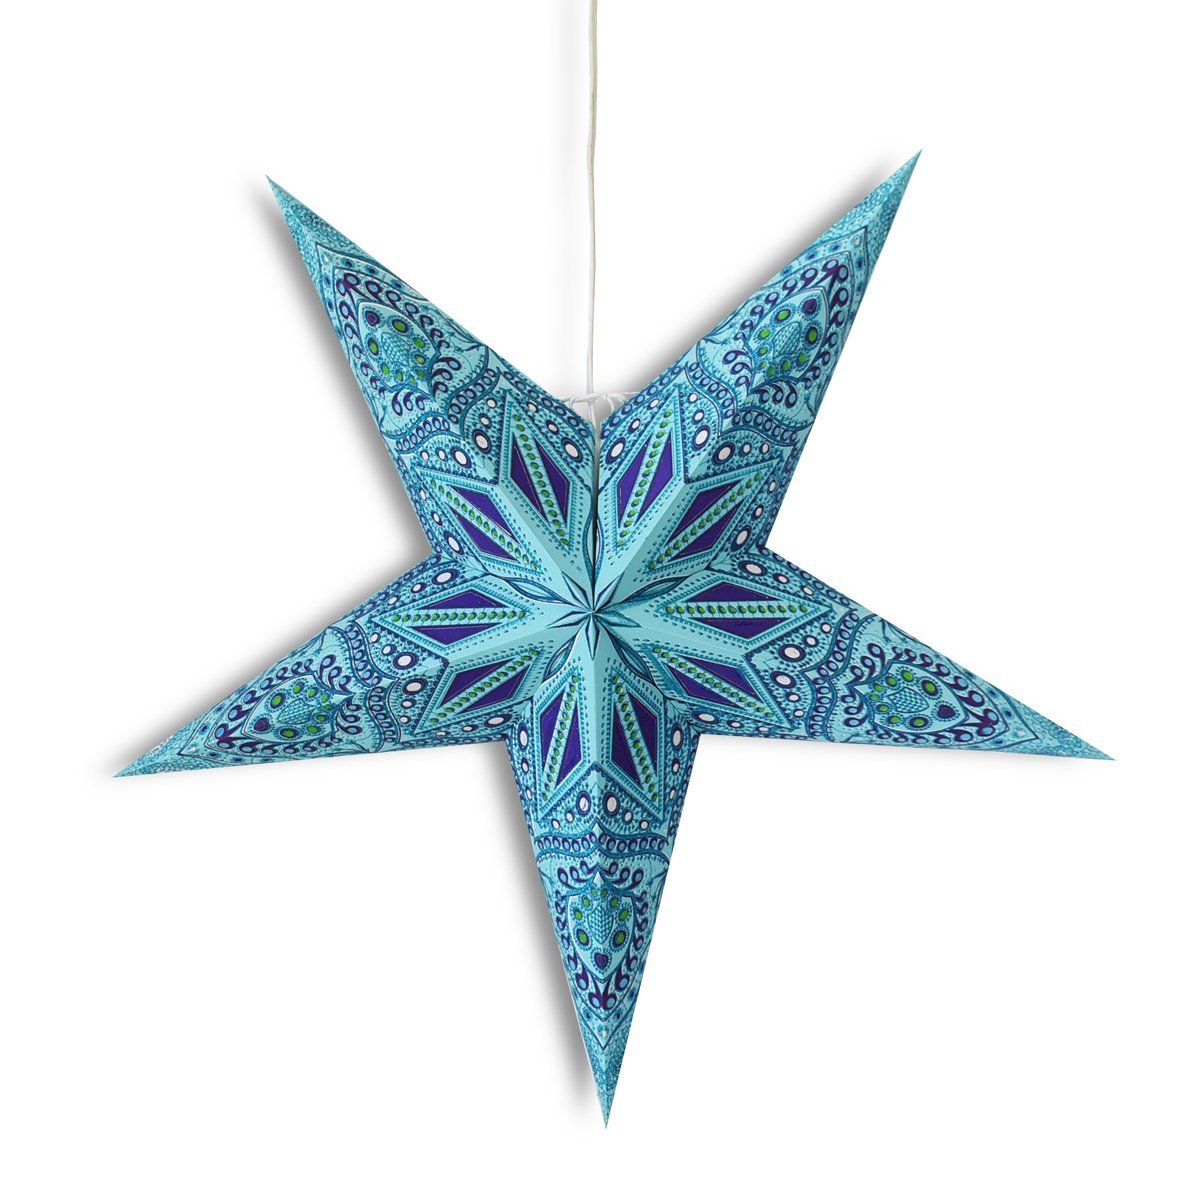 24&quot; Turquoise Crystal Glitter Paper Star Lantern, Hanging Wedding &amp; Party Decoration - PaperLanternStore.com - Paper Lanterns, Decor, Party Lights &amp; More